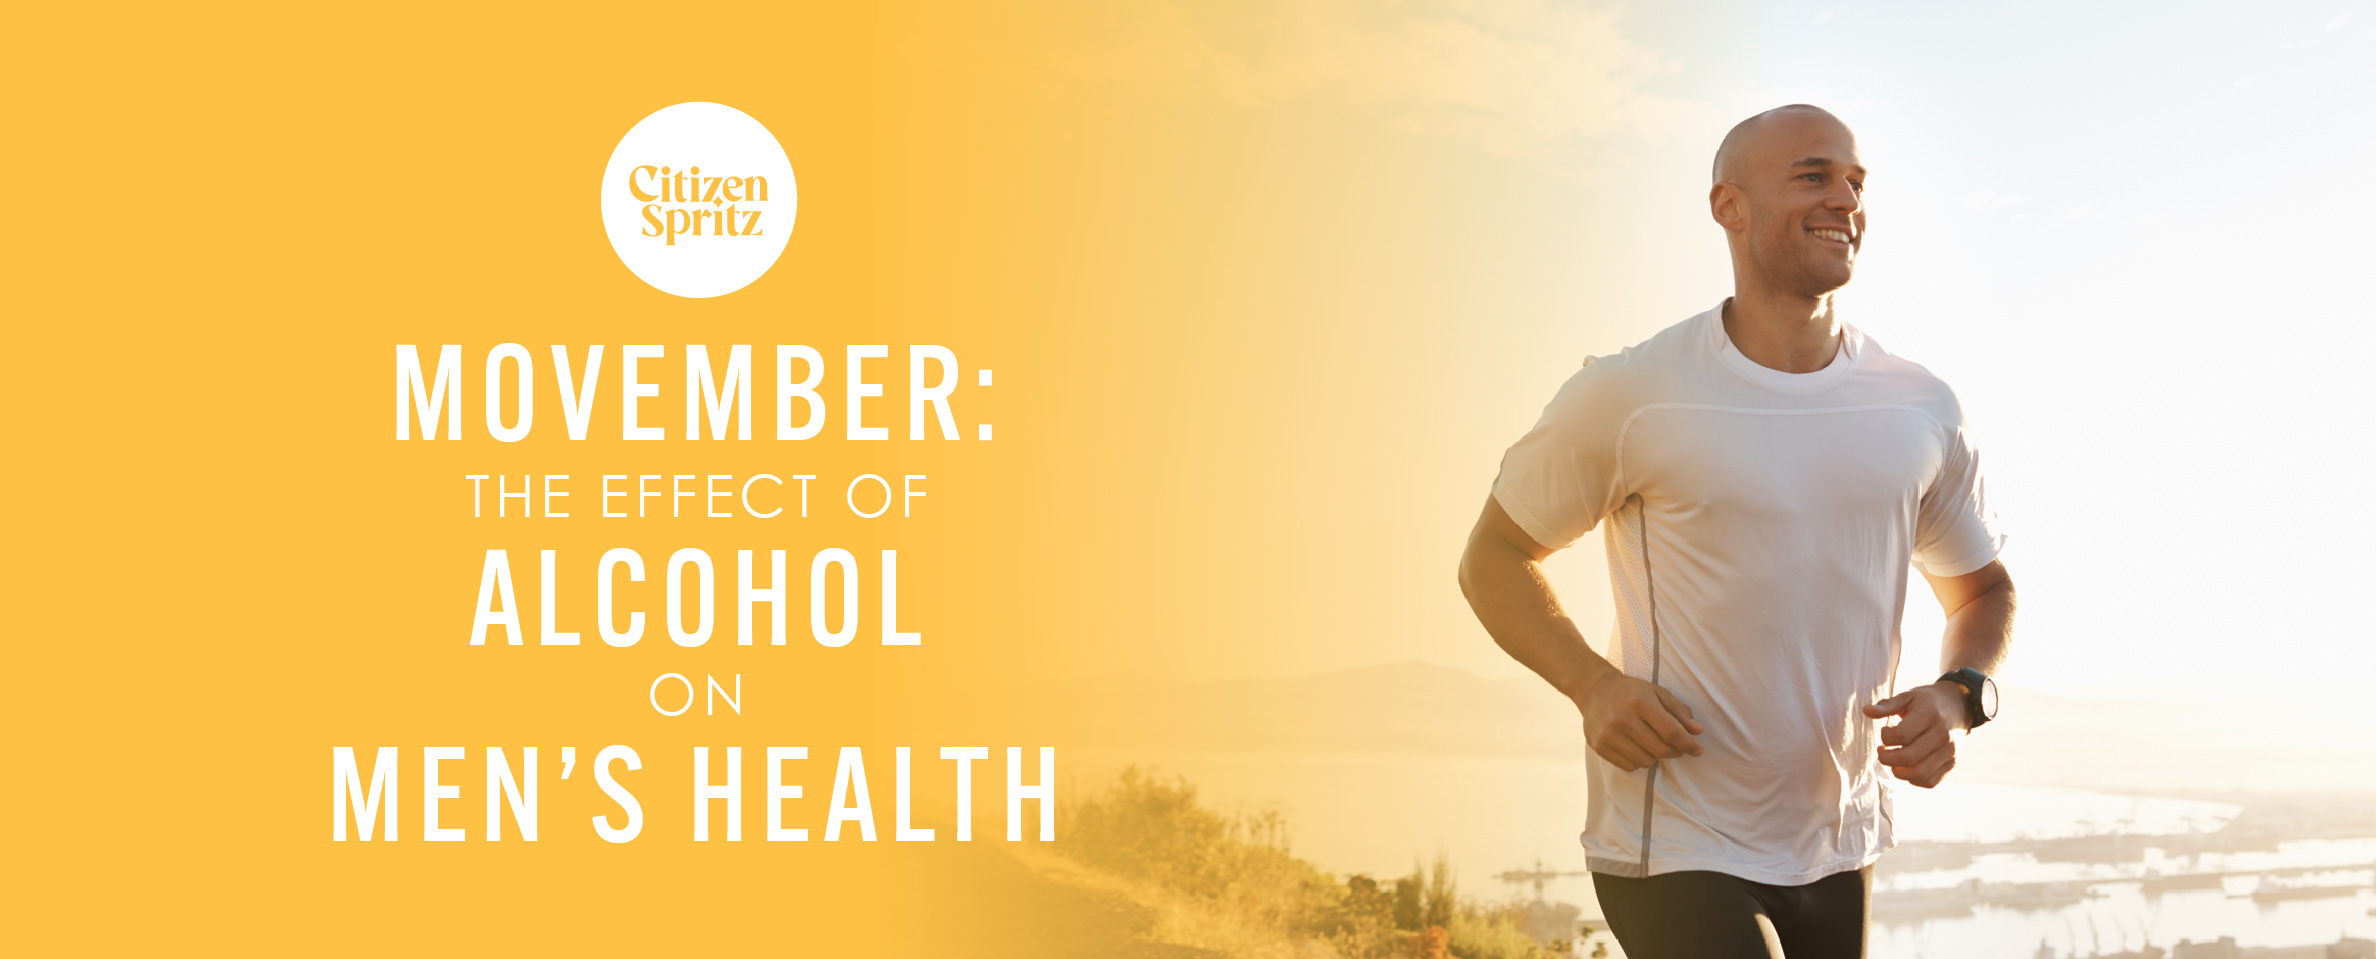 Movember and beyond - understanding the impact of alcohol on men's health